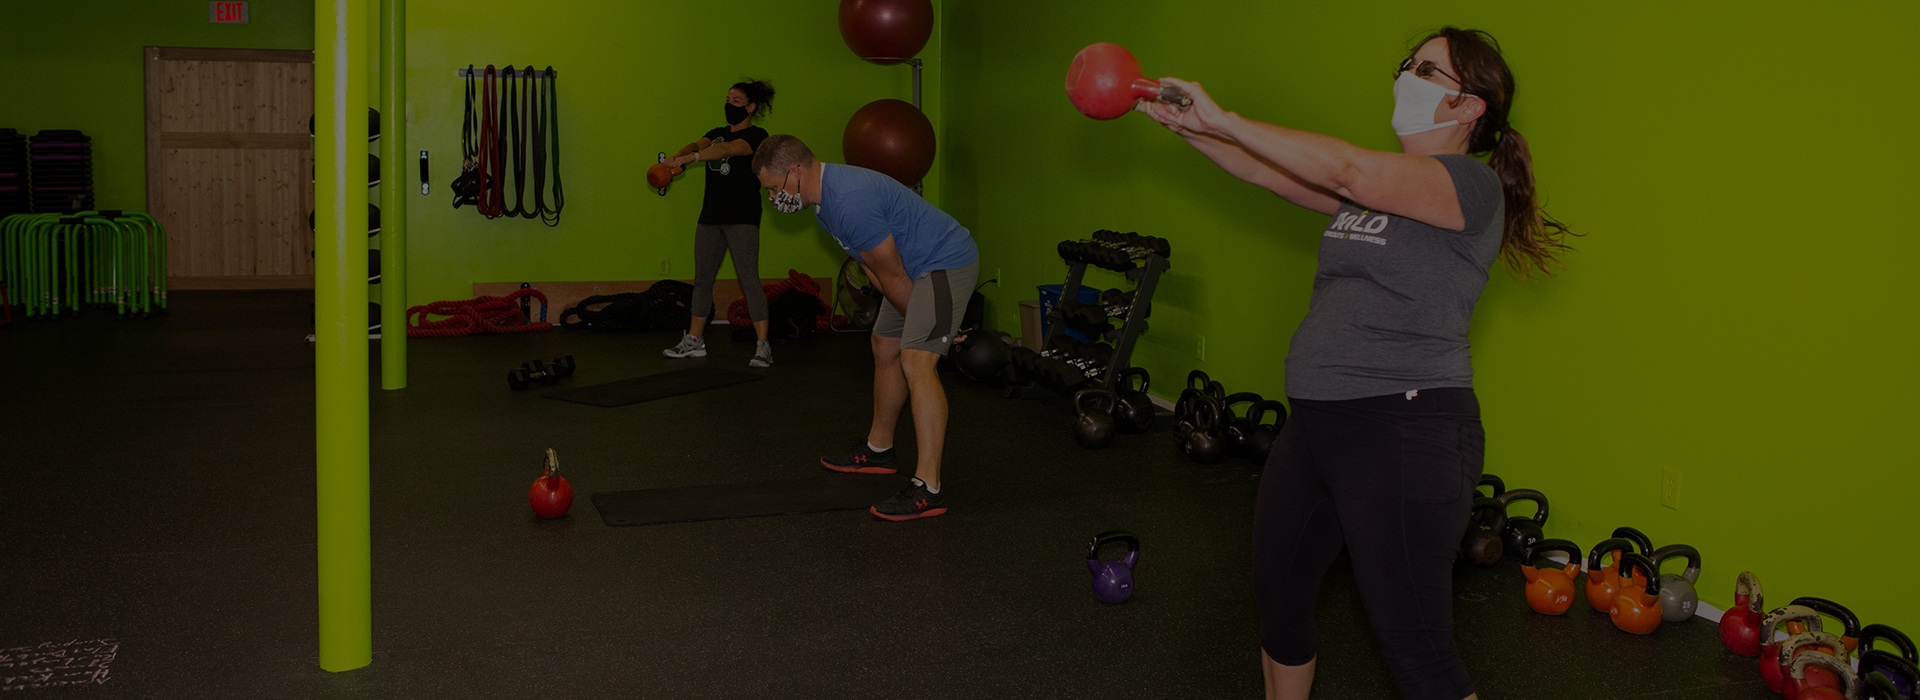 group workout with kettlebells